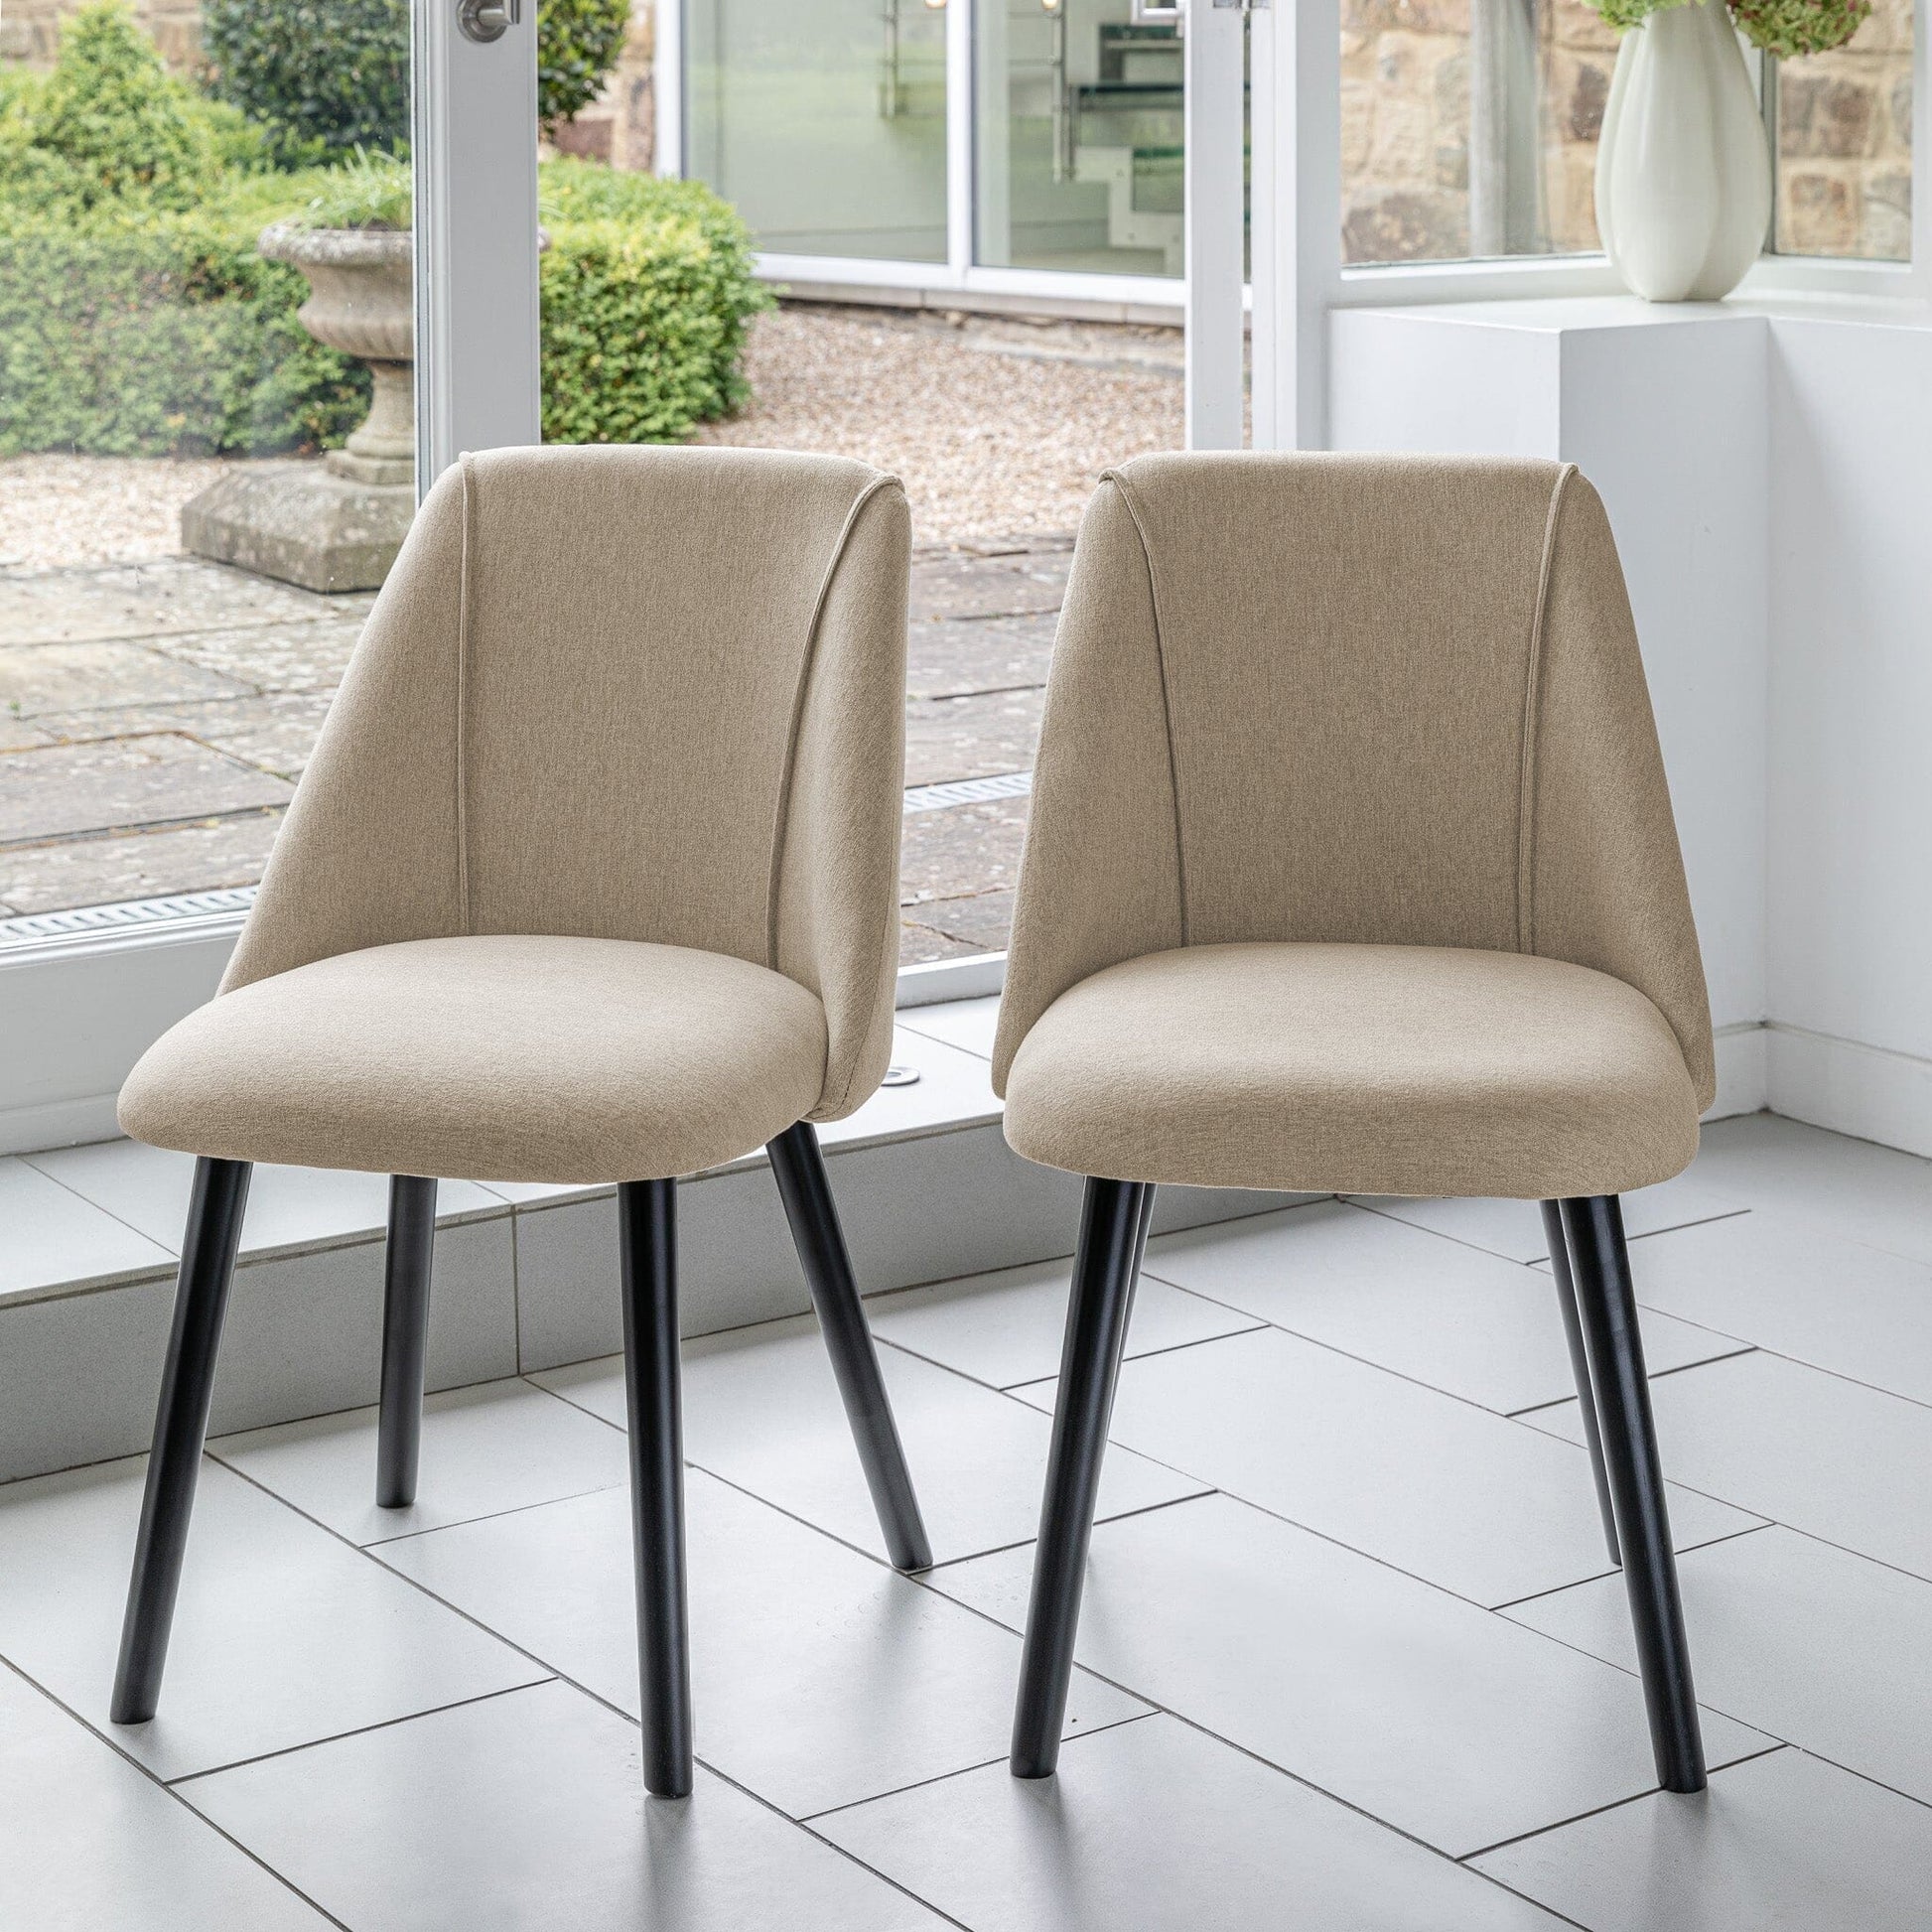 Amelia Whitewash Dining Table Set - 6 Seater - Freya Oatmeal Dining Chairs With Black Legs